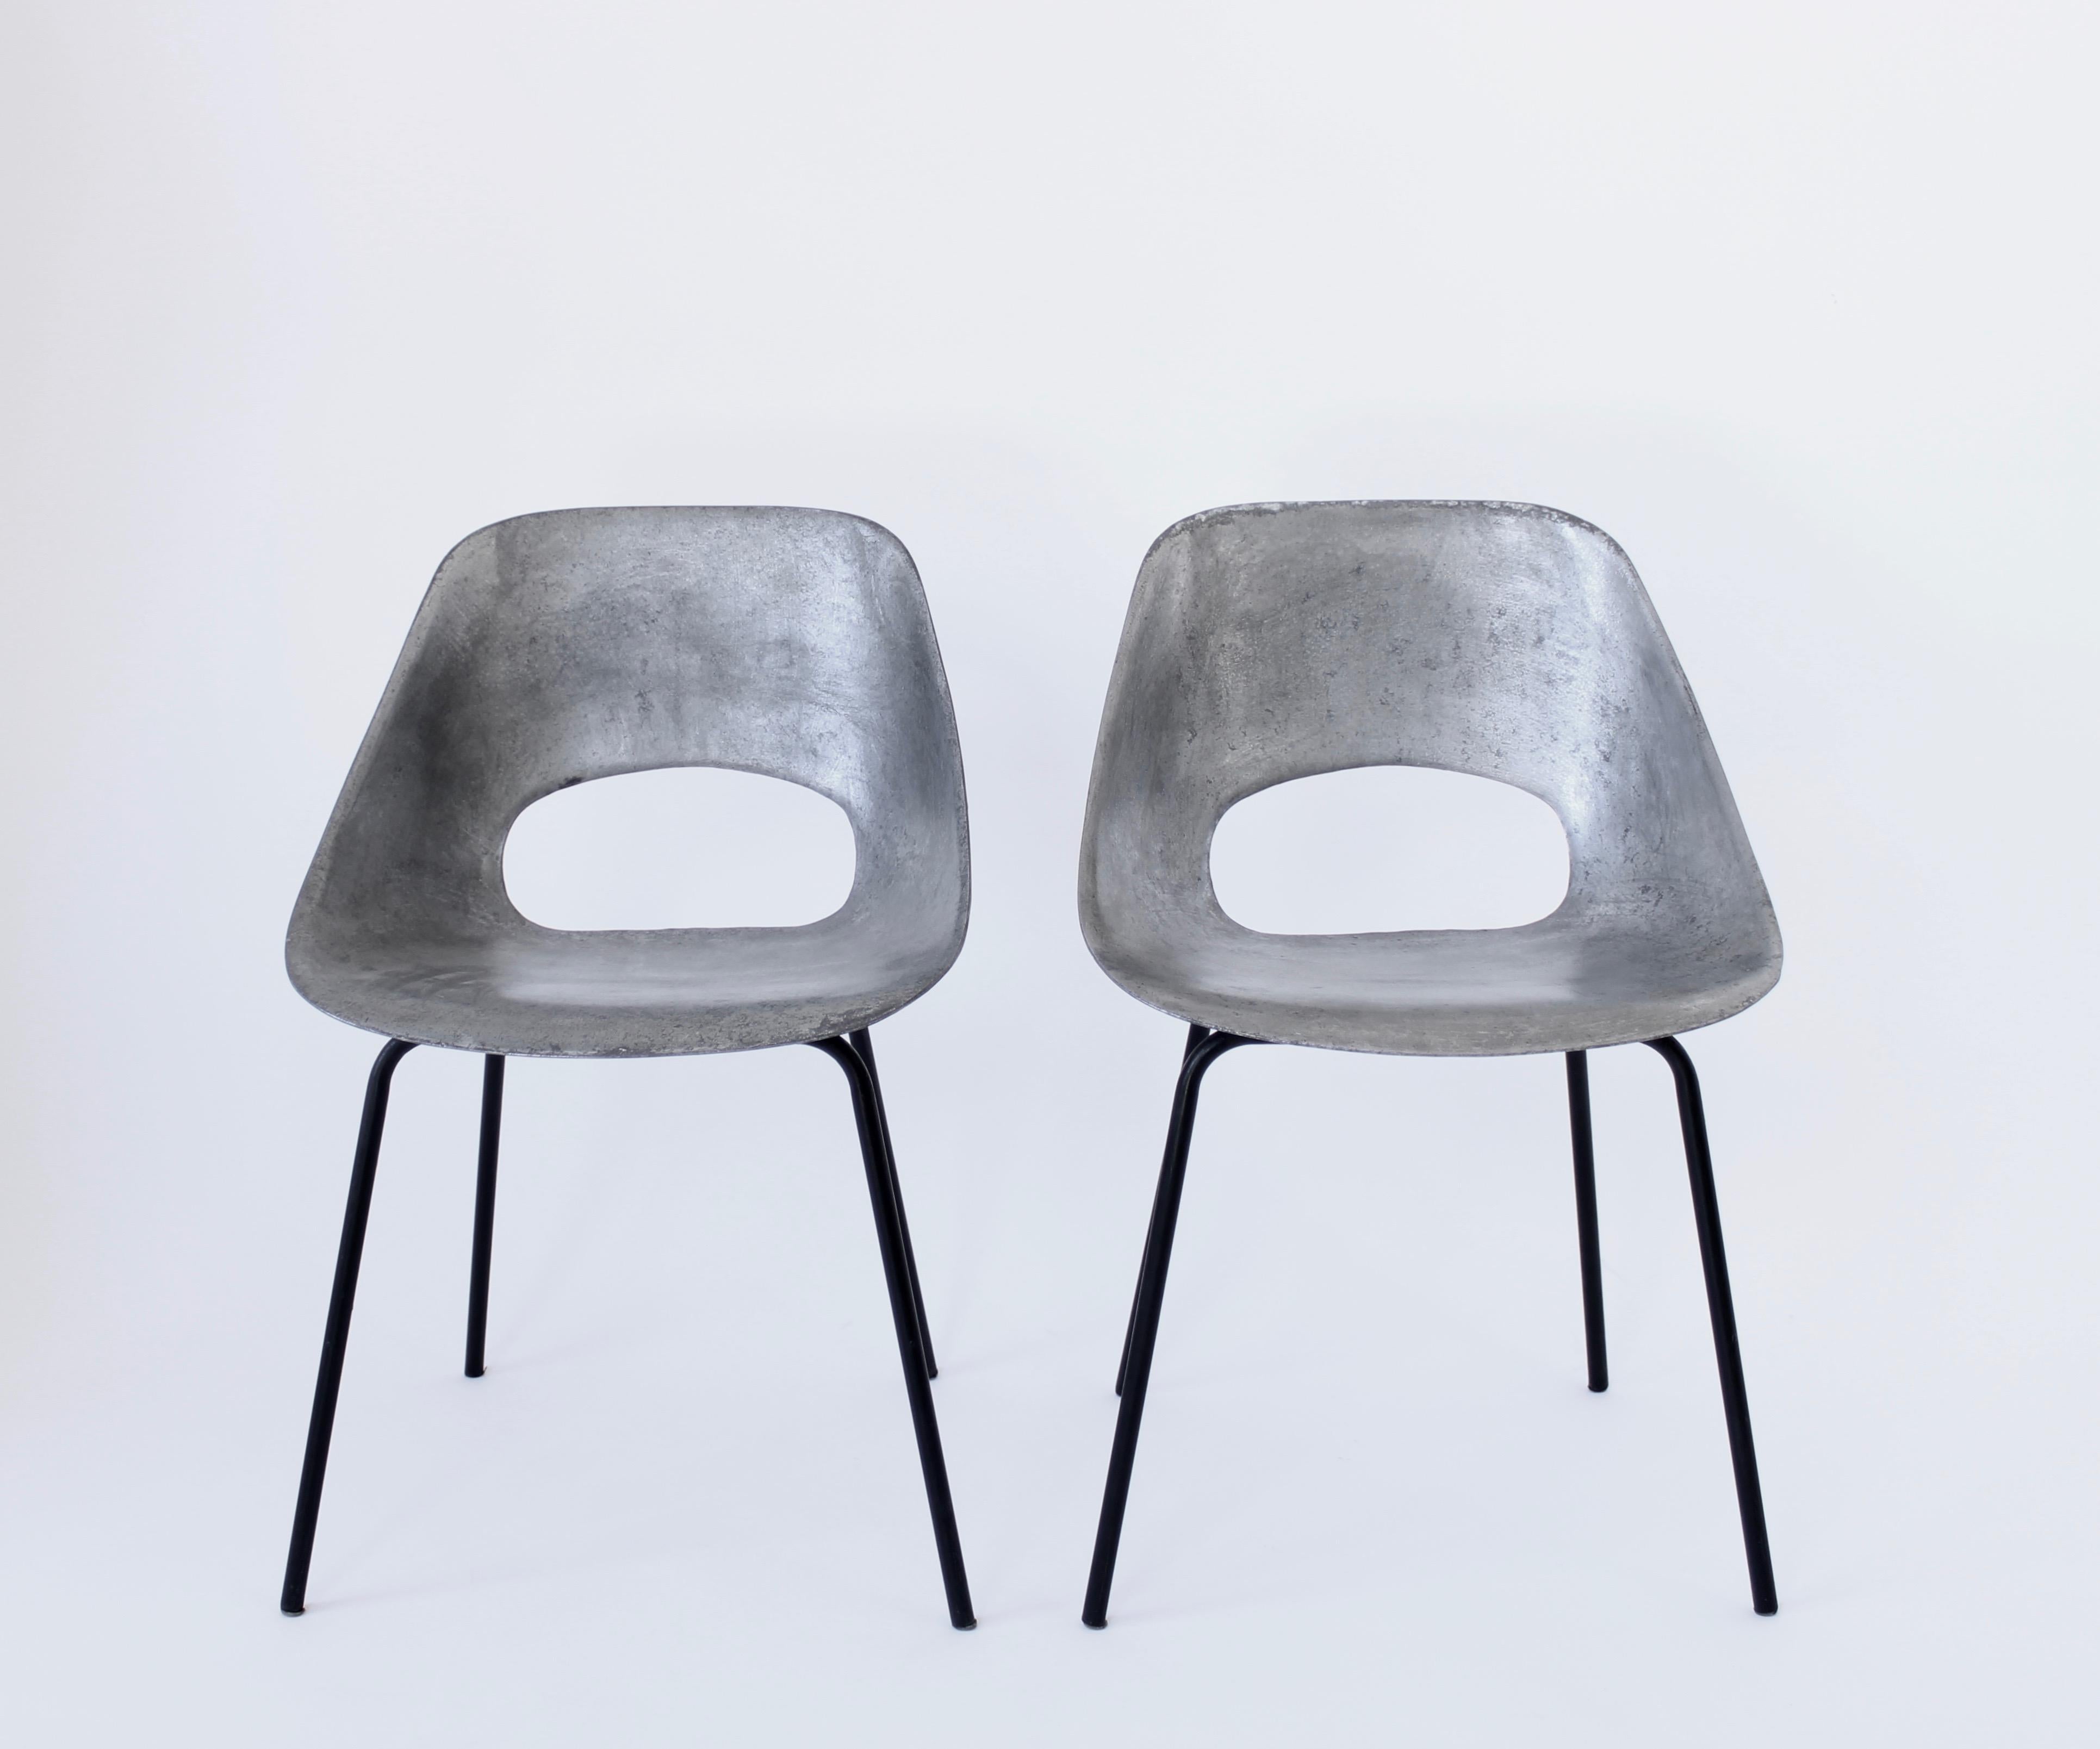 Pair of rare cast aluminum Tulip chairs by Pierre Guariche for Steiner, France, 1954.
Sculpted and curved cast aluminum seat with an opening on the seat on sleek four leg black tubular metal base. Statement chair and collectable. Comfortable and